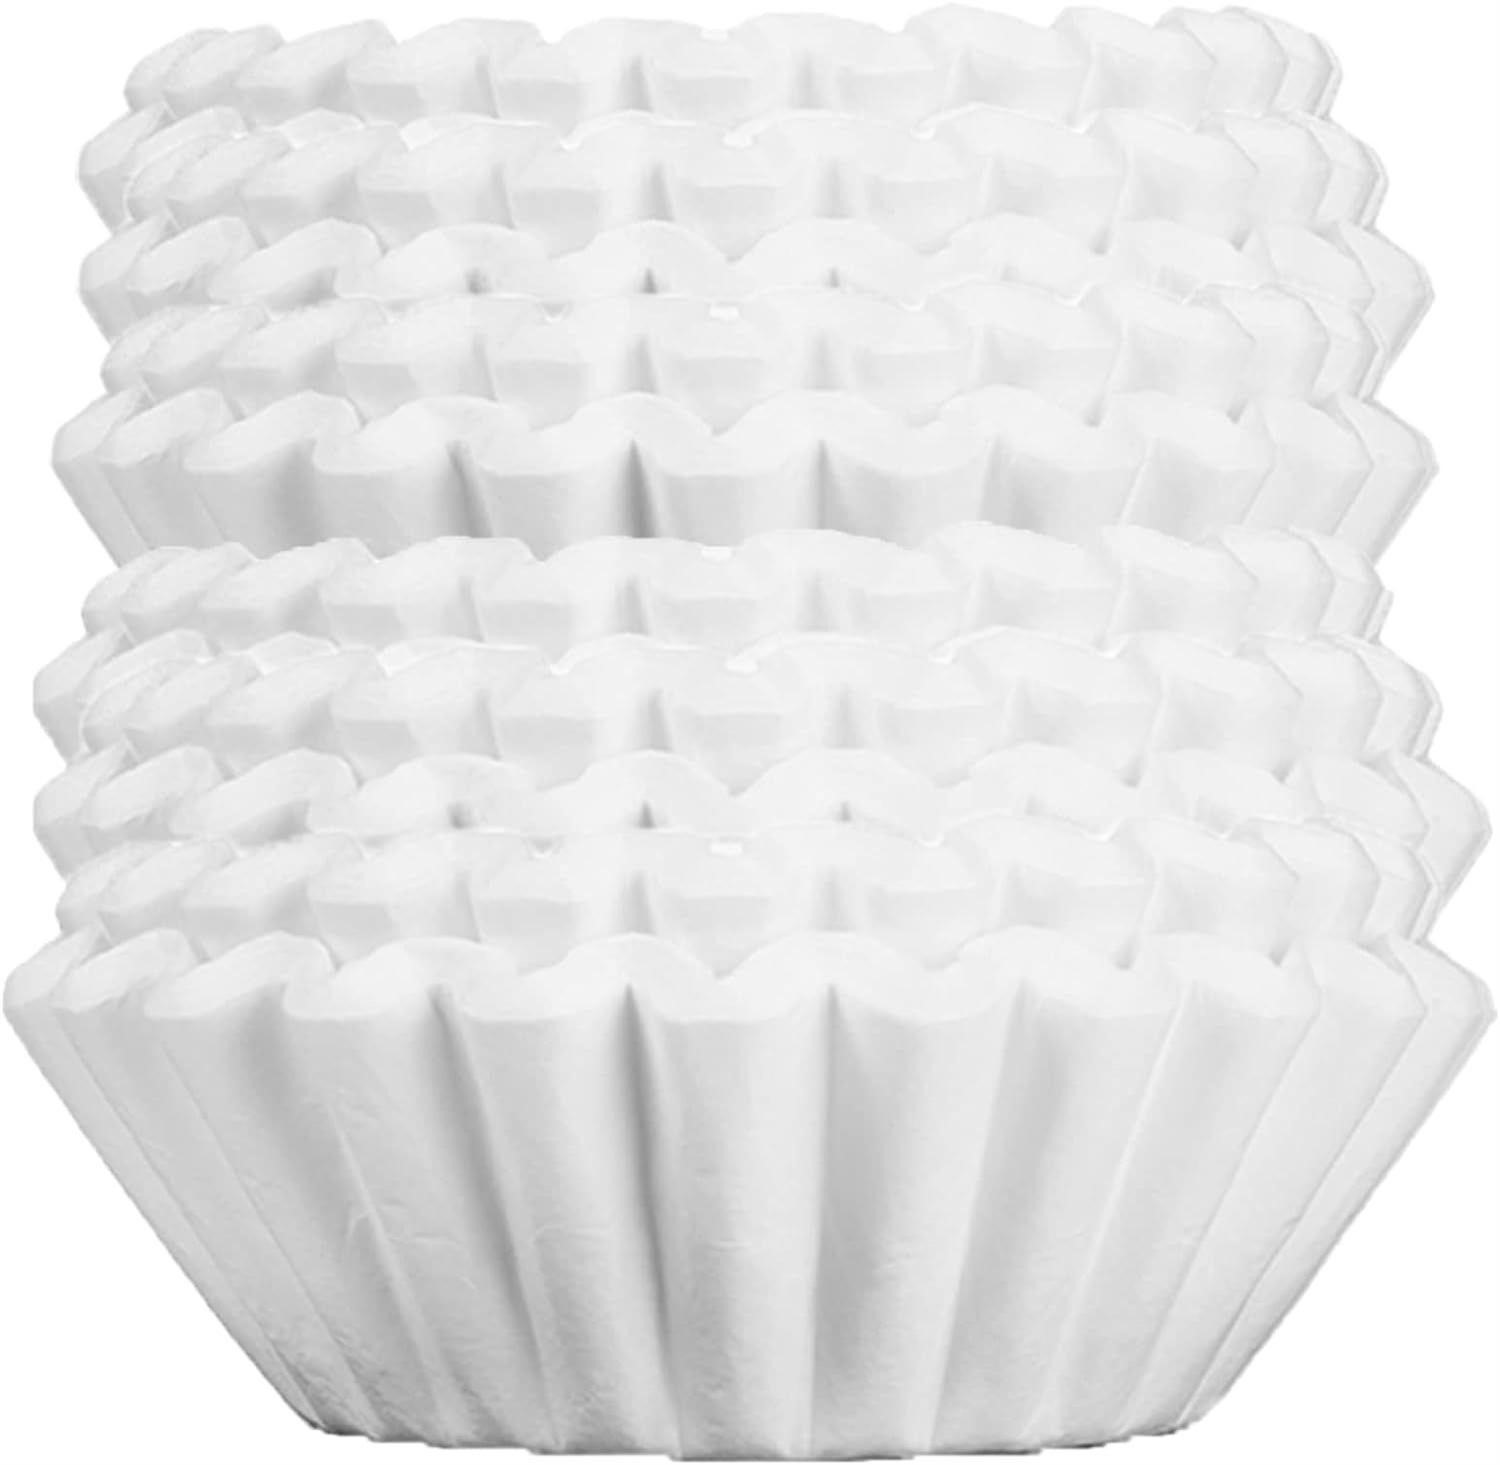 Large Coffee Filters (500 Count)